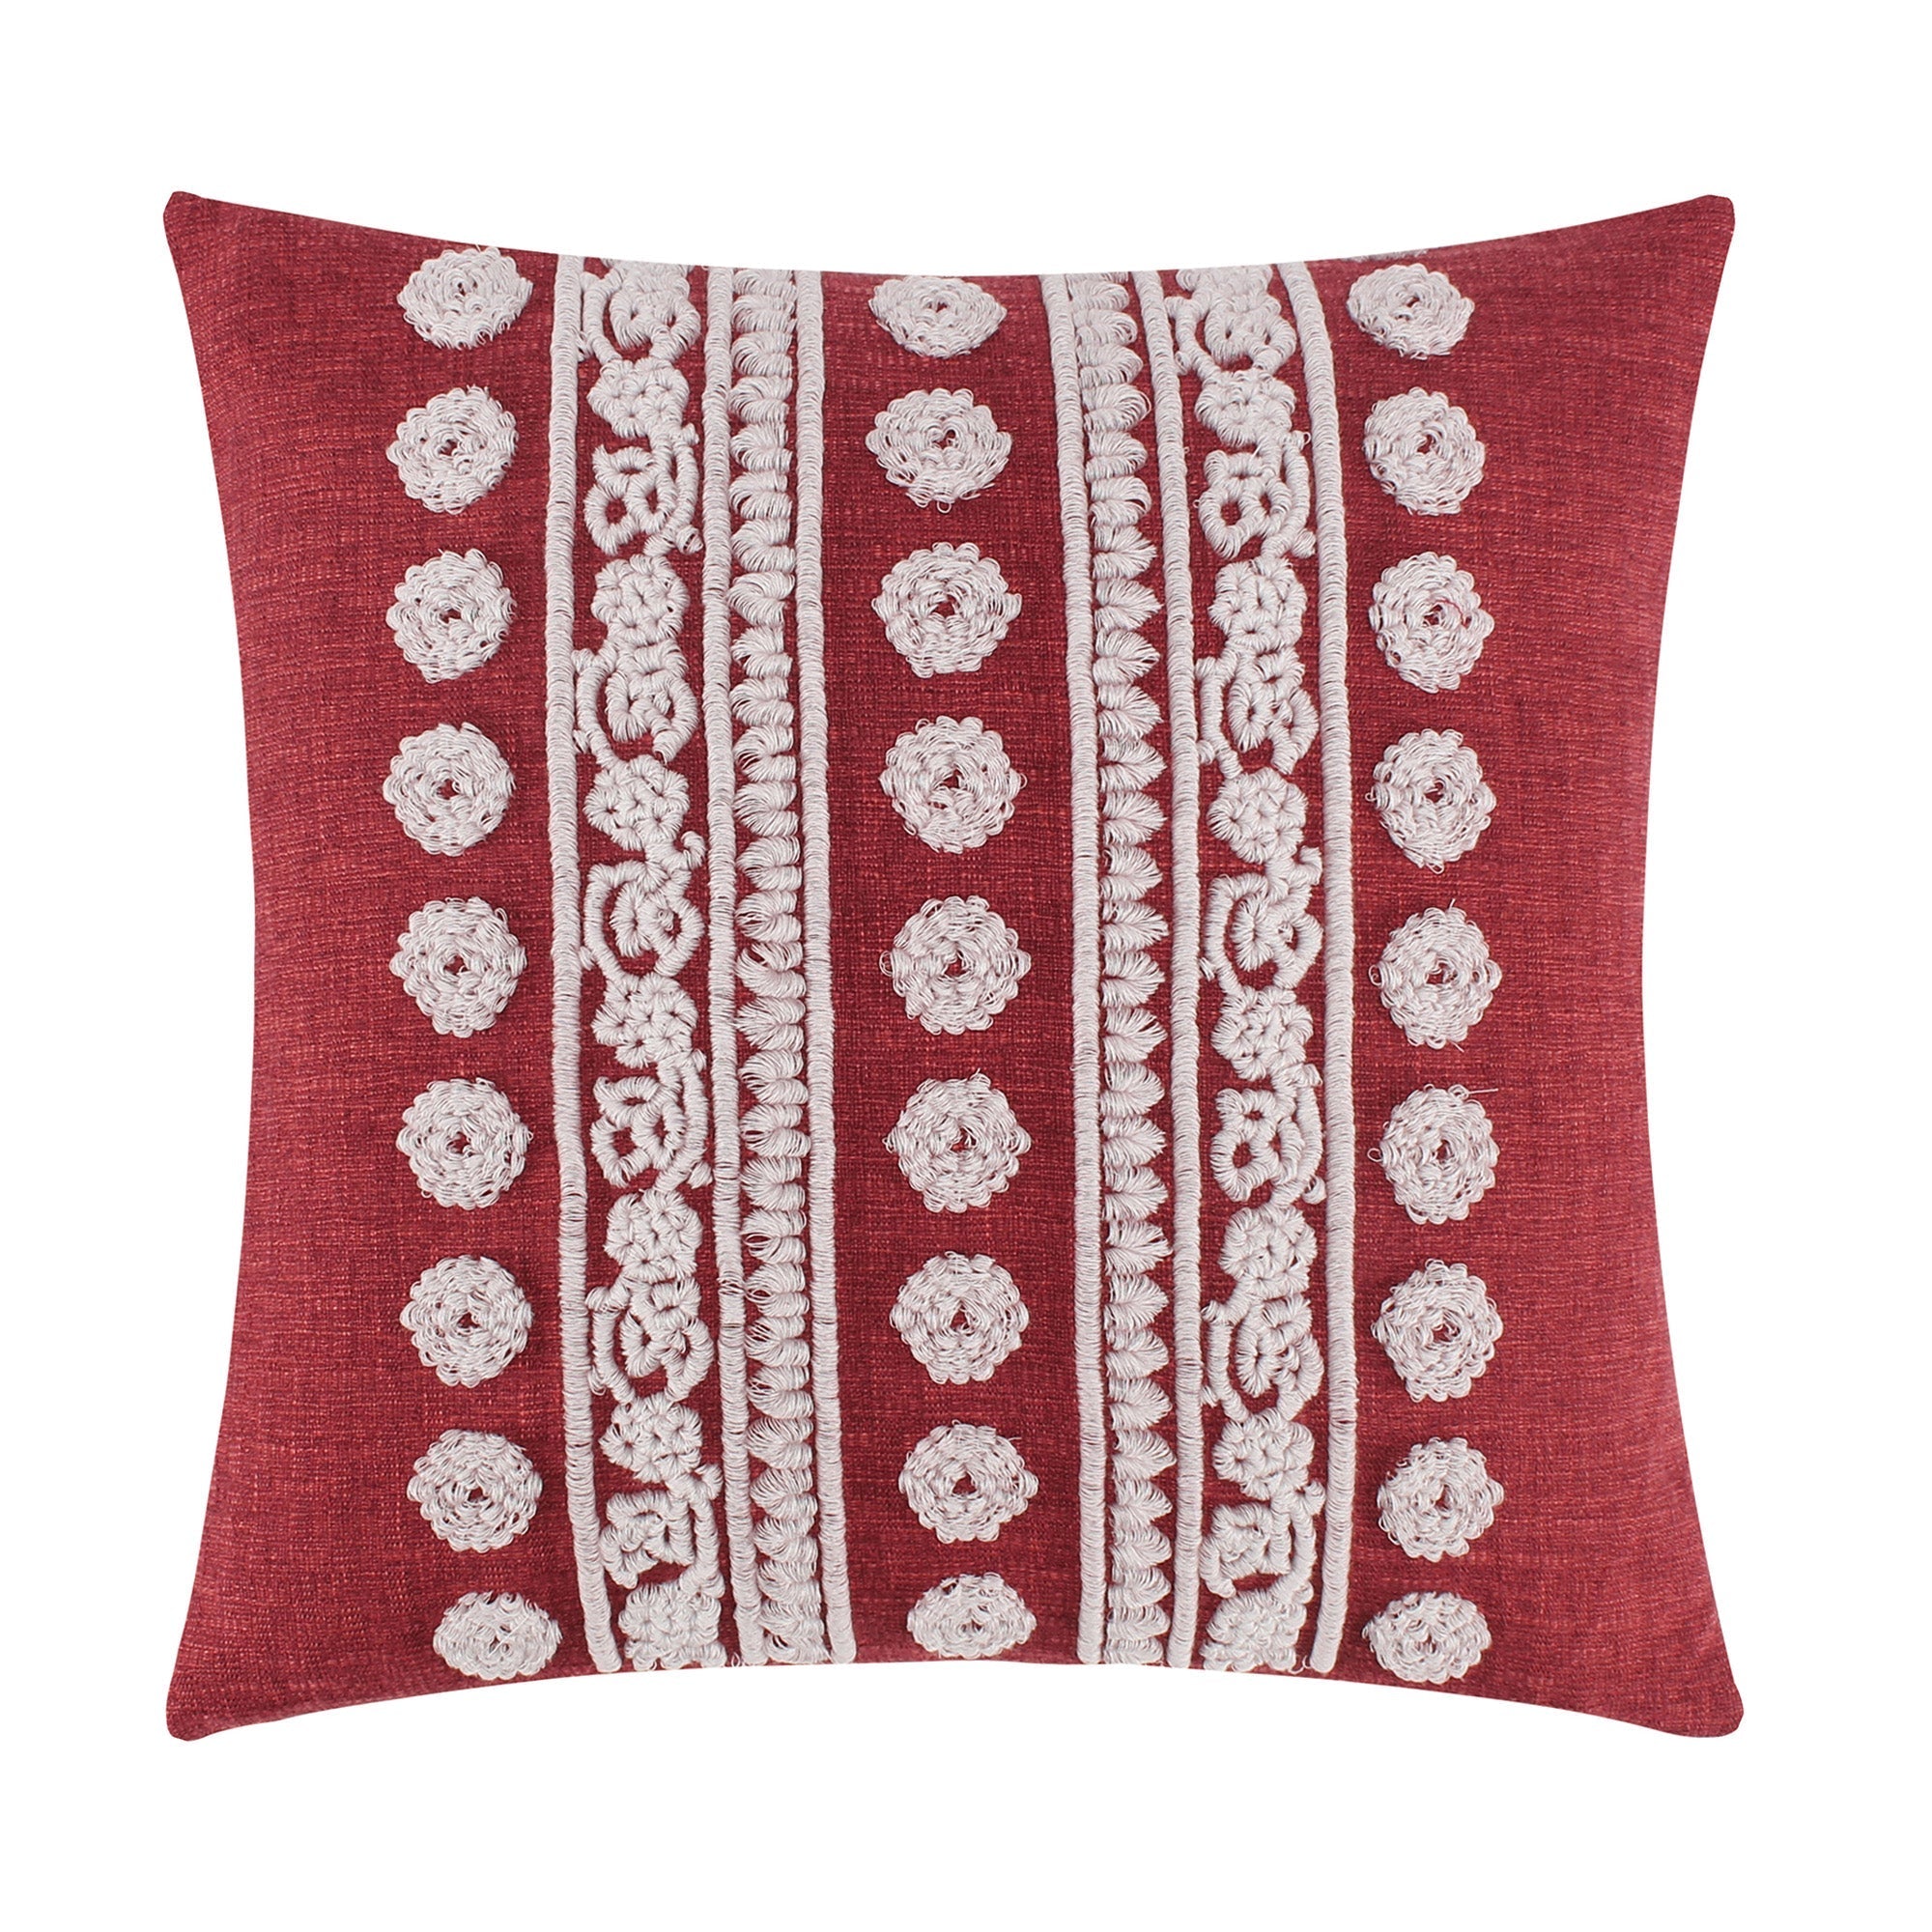 Khotan Embroidered Red Pillow 18x18